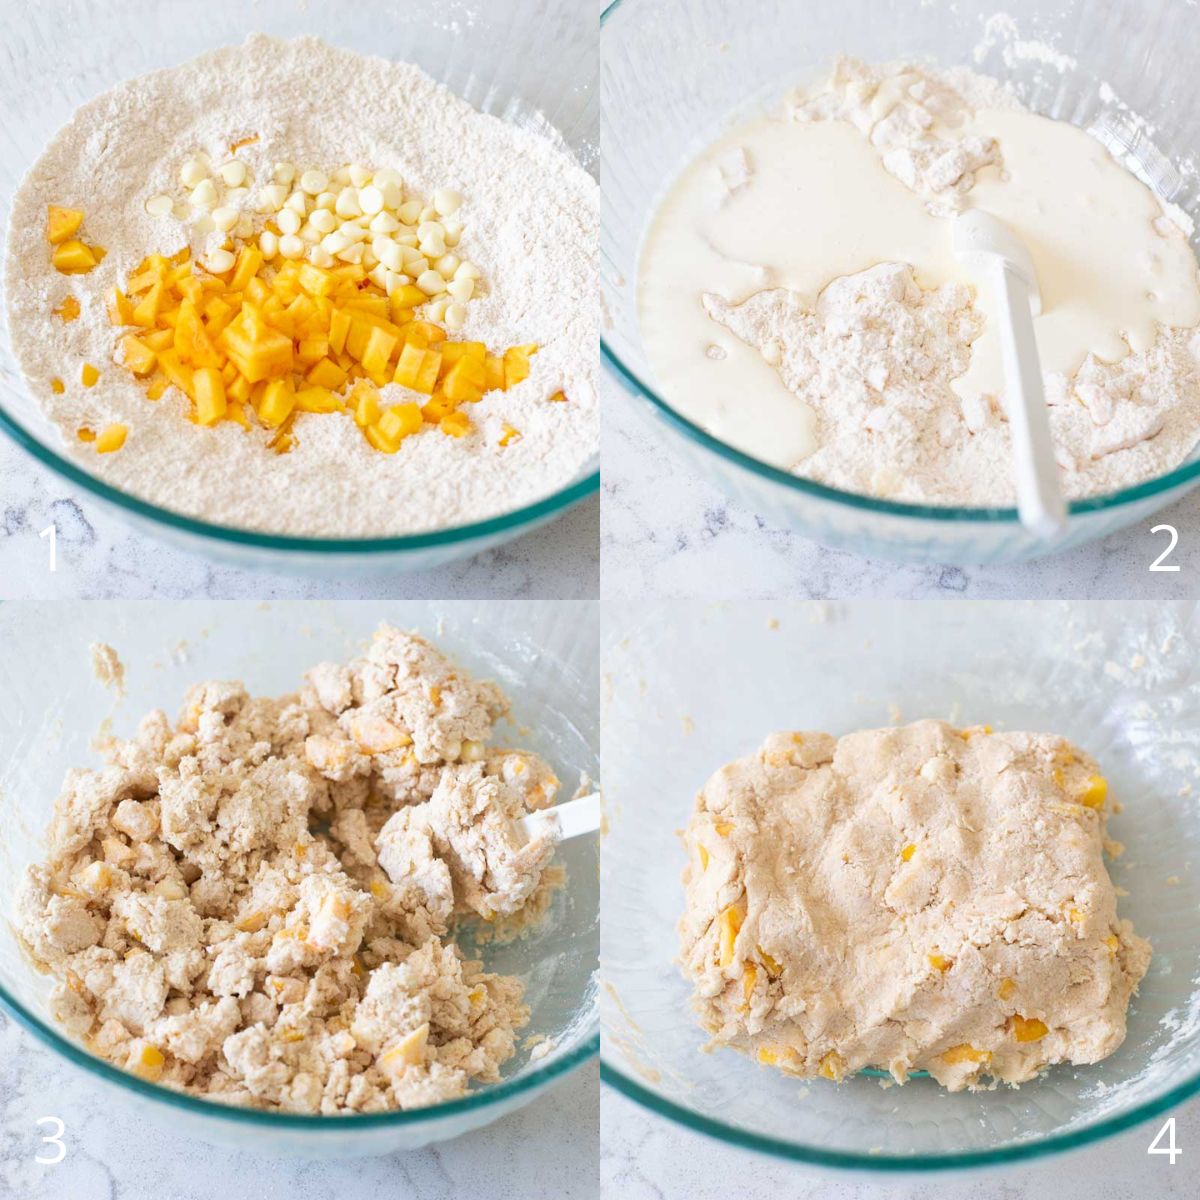 The step by step photos show how to make the scone dough.